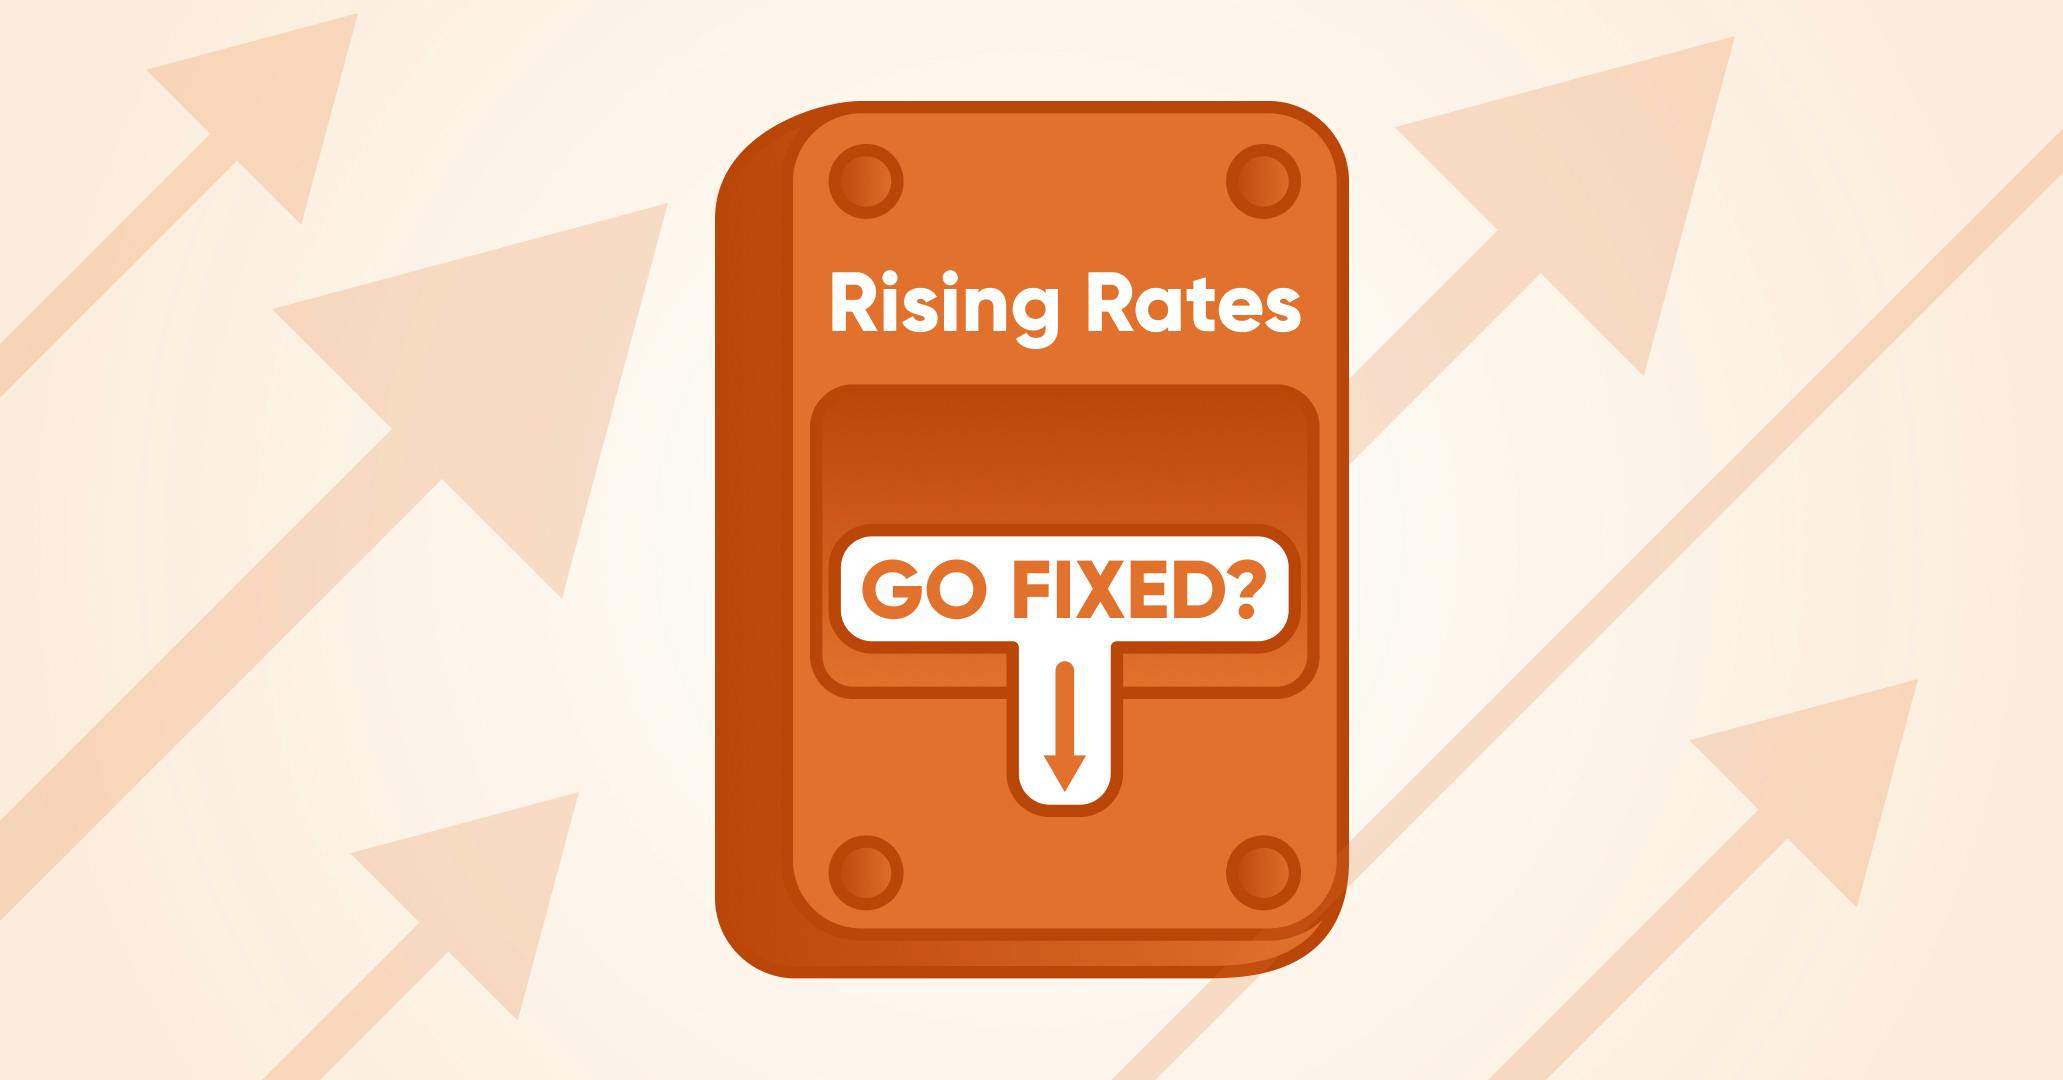 Time to switch to a fixed rate?